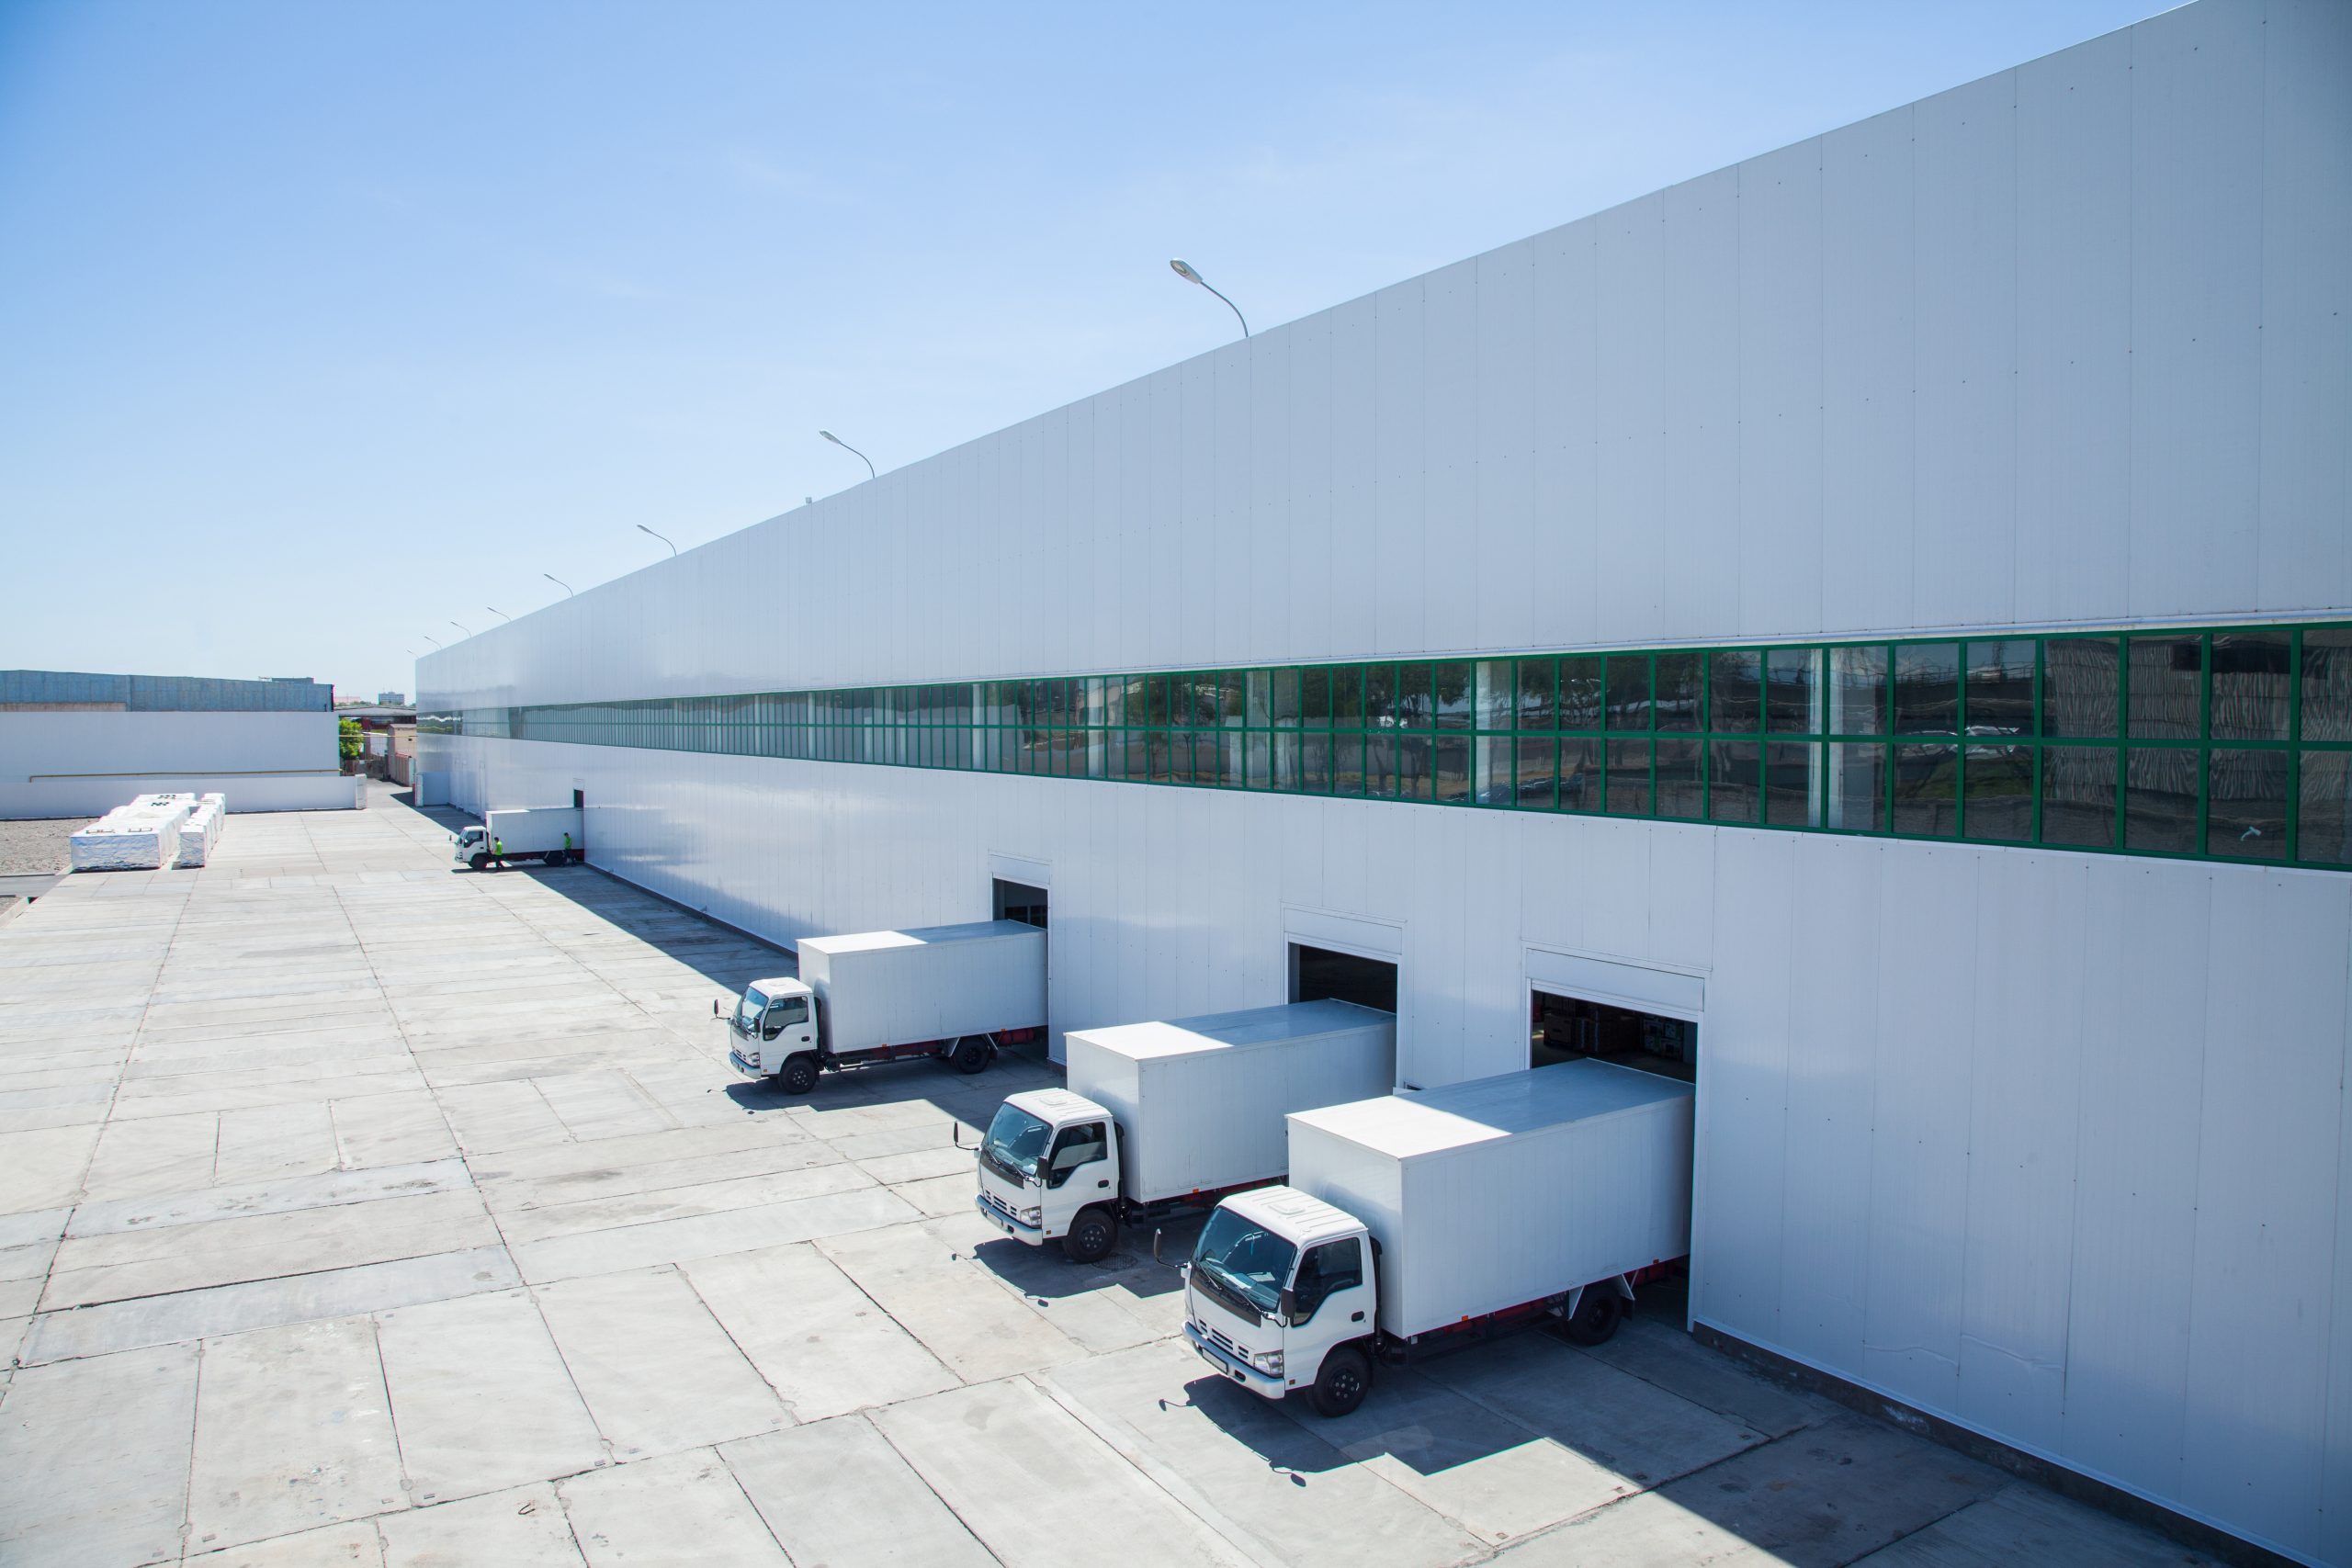 Trucks parked at a warehouse loading dock under a clear blue sky.